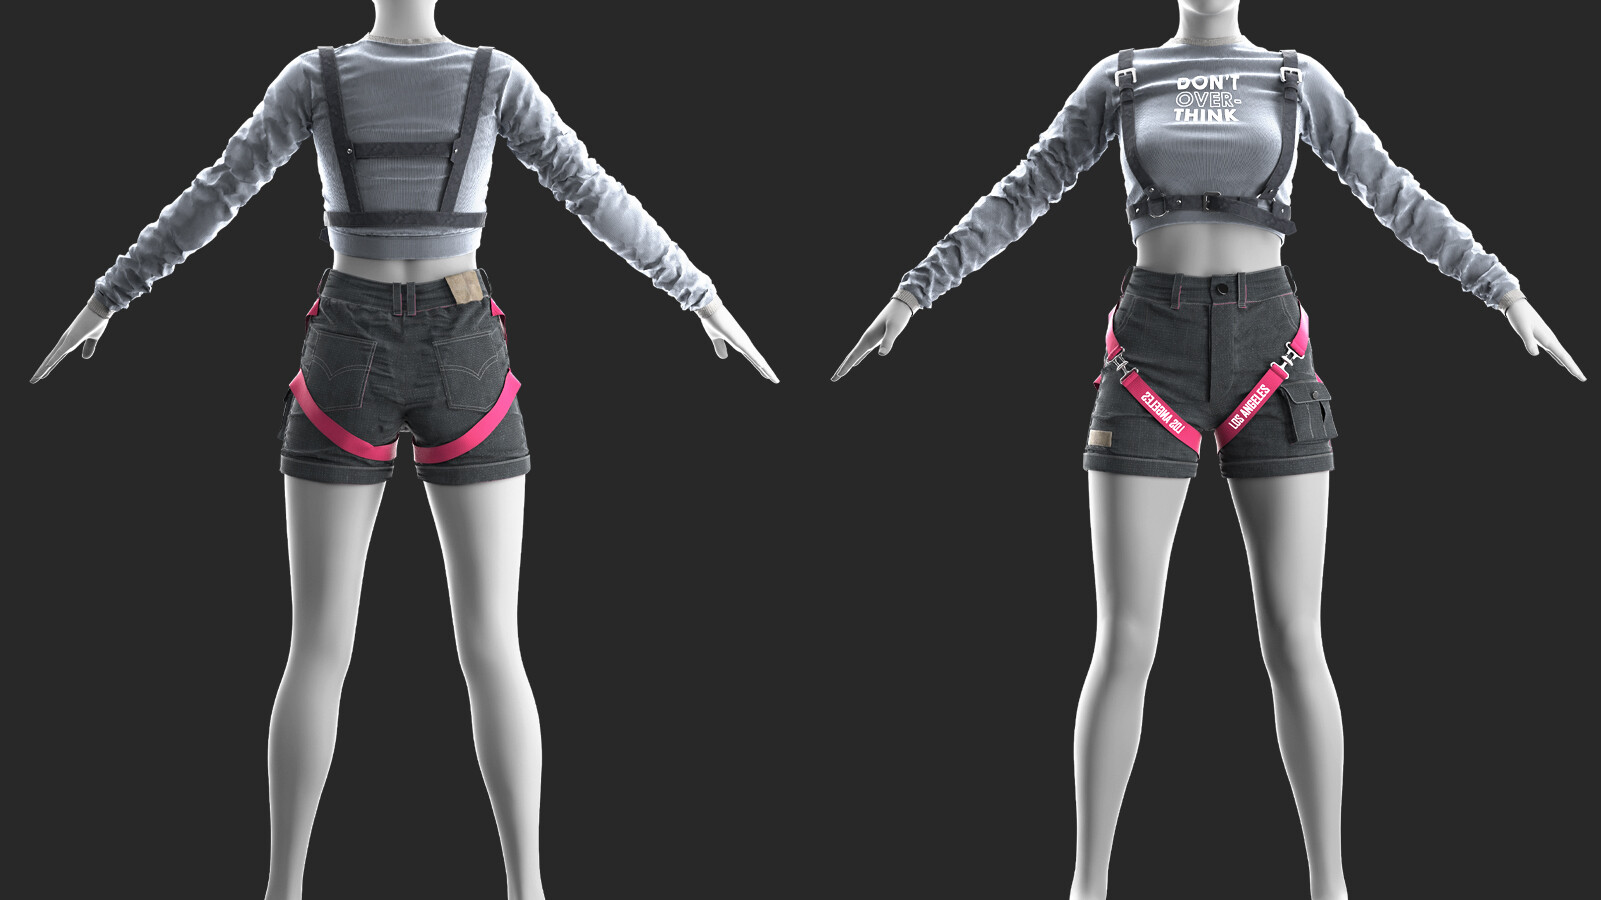 ArtStation - 3 Girl's Outfits VOL 4 - Marvelous / CLO Project file ...